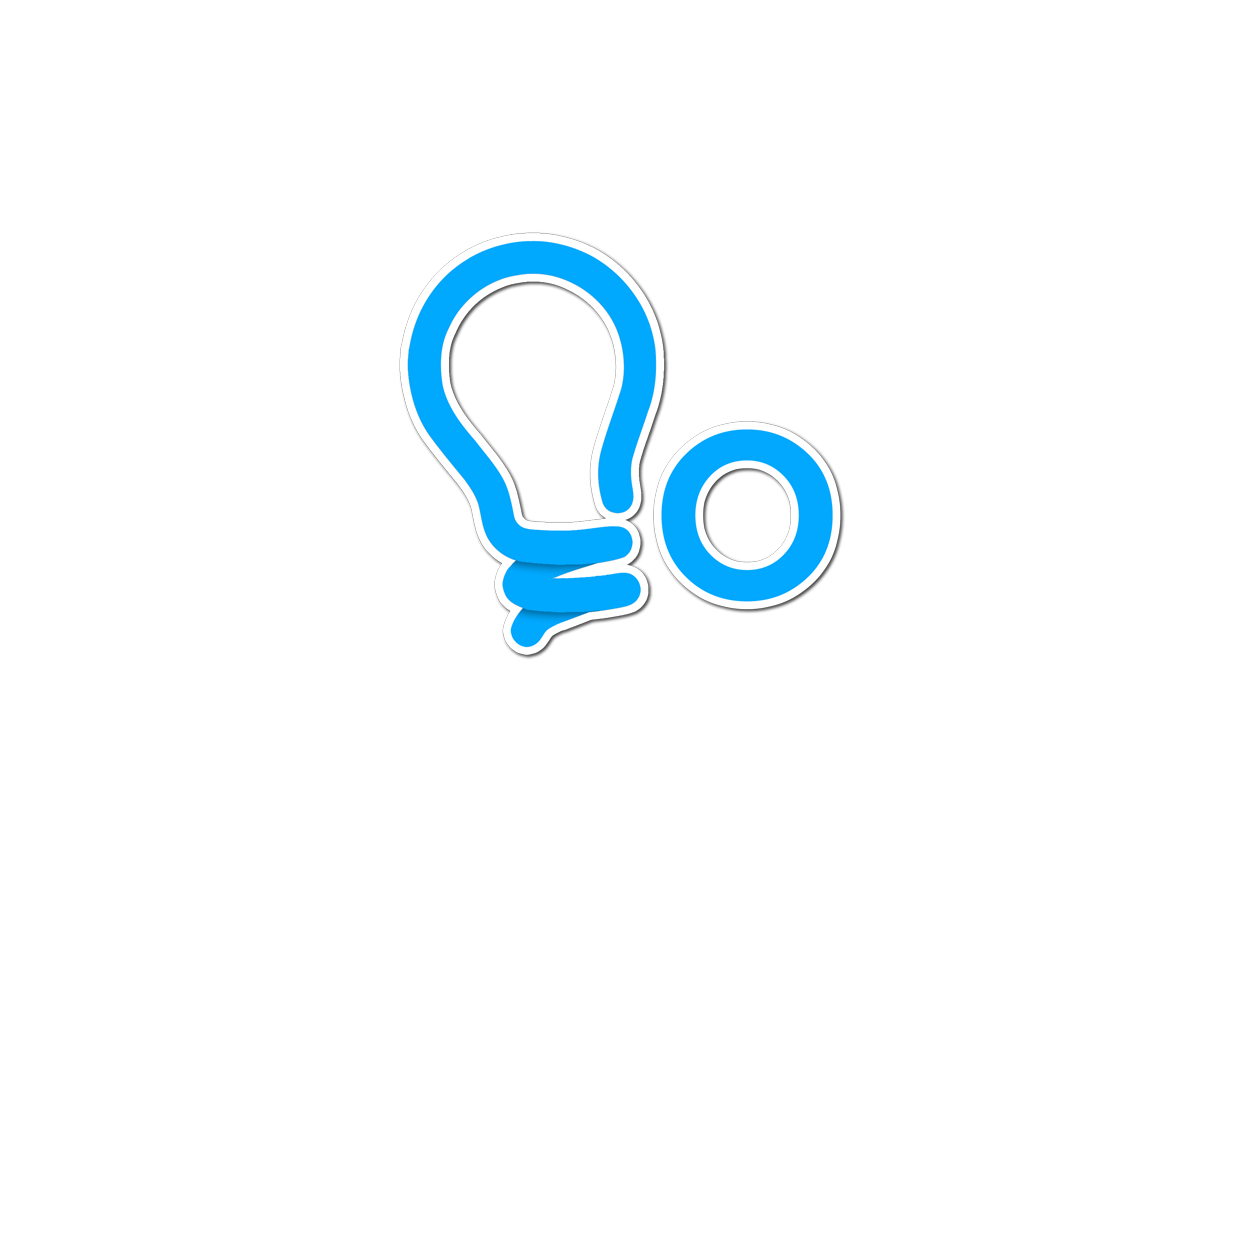 Ameego Labs, To infinity and beyond